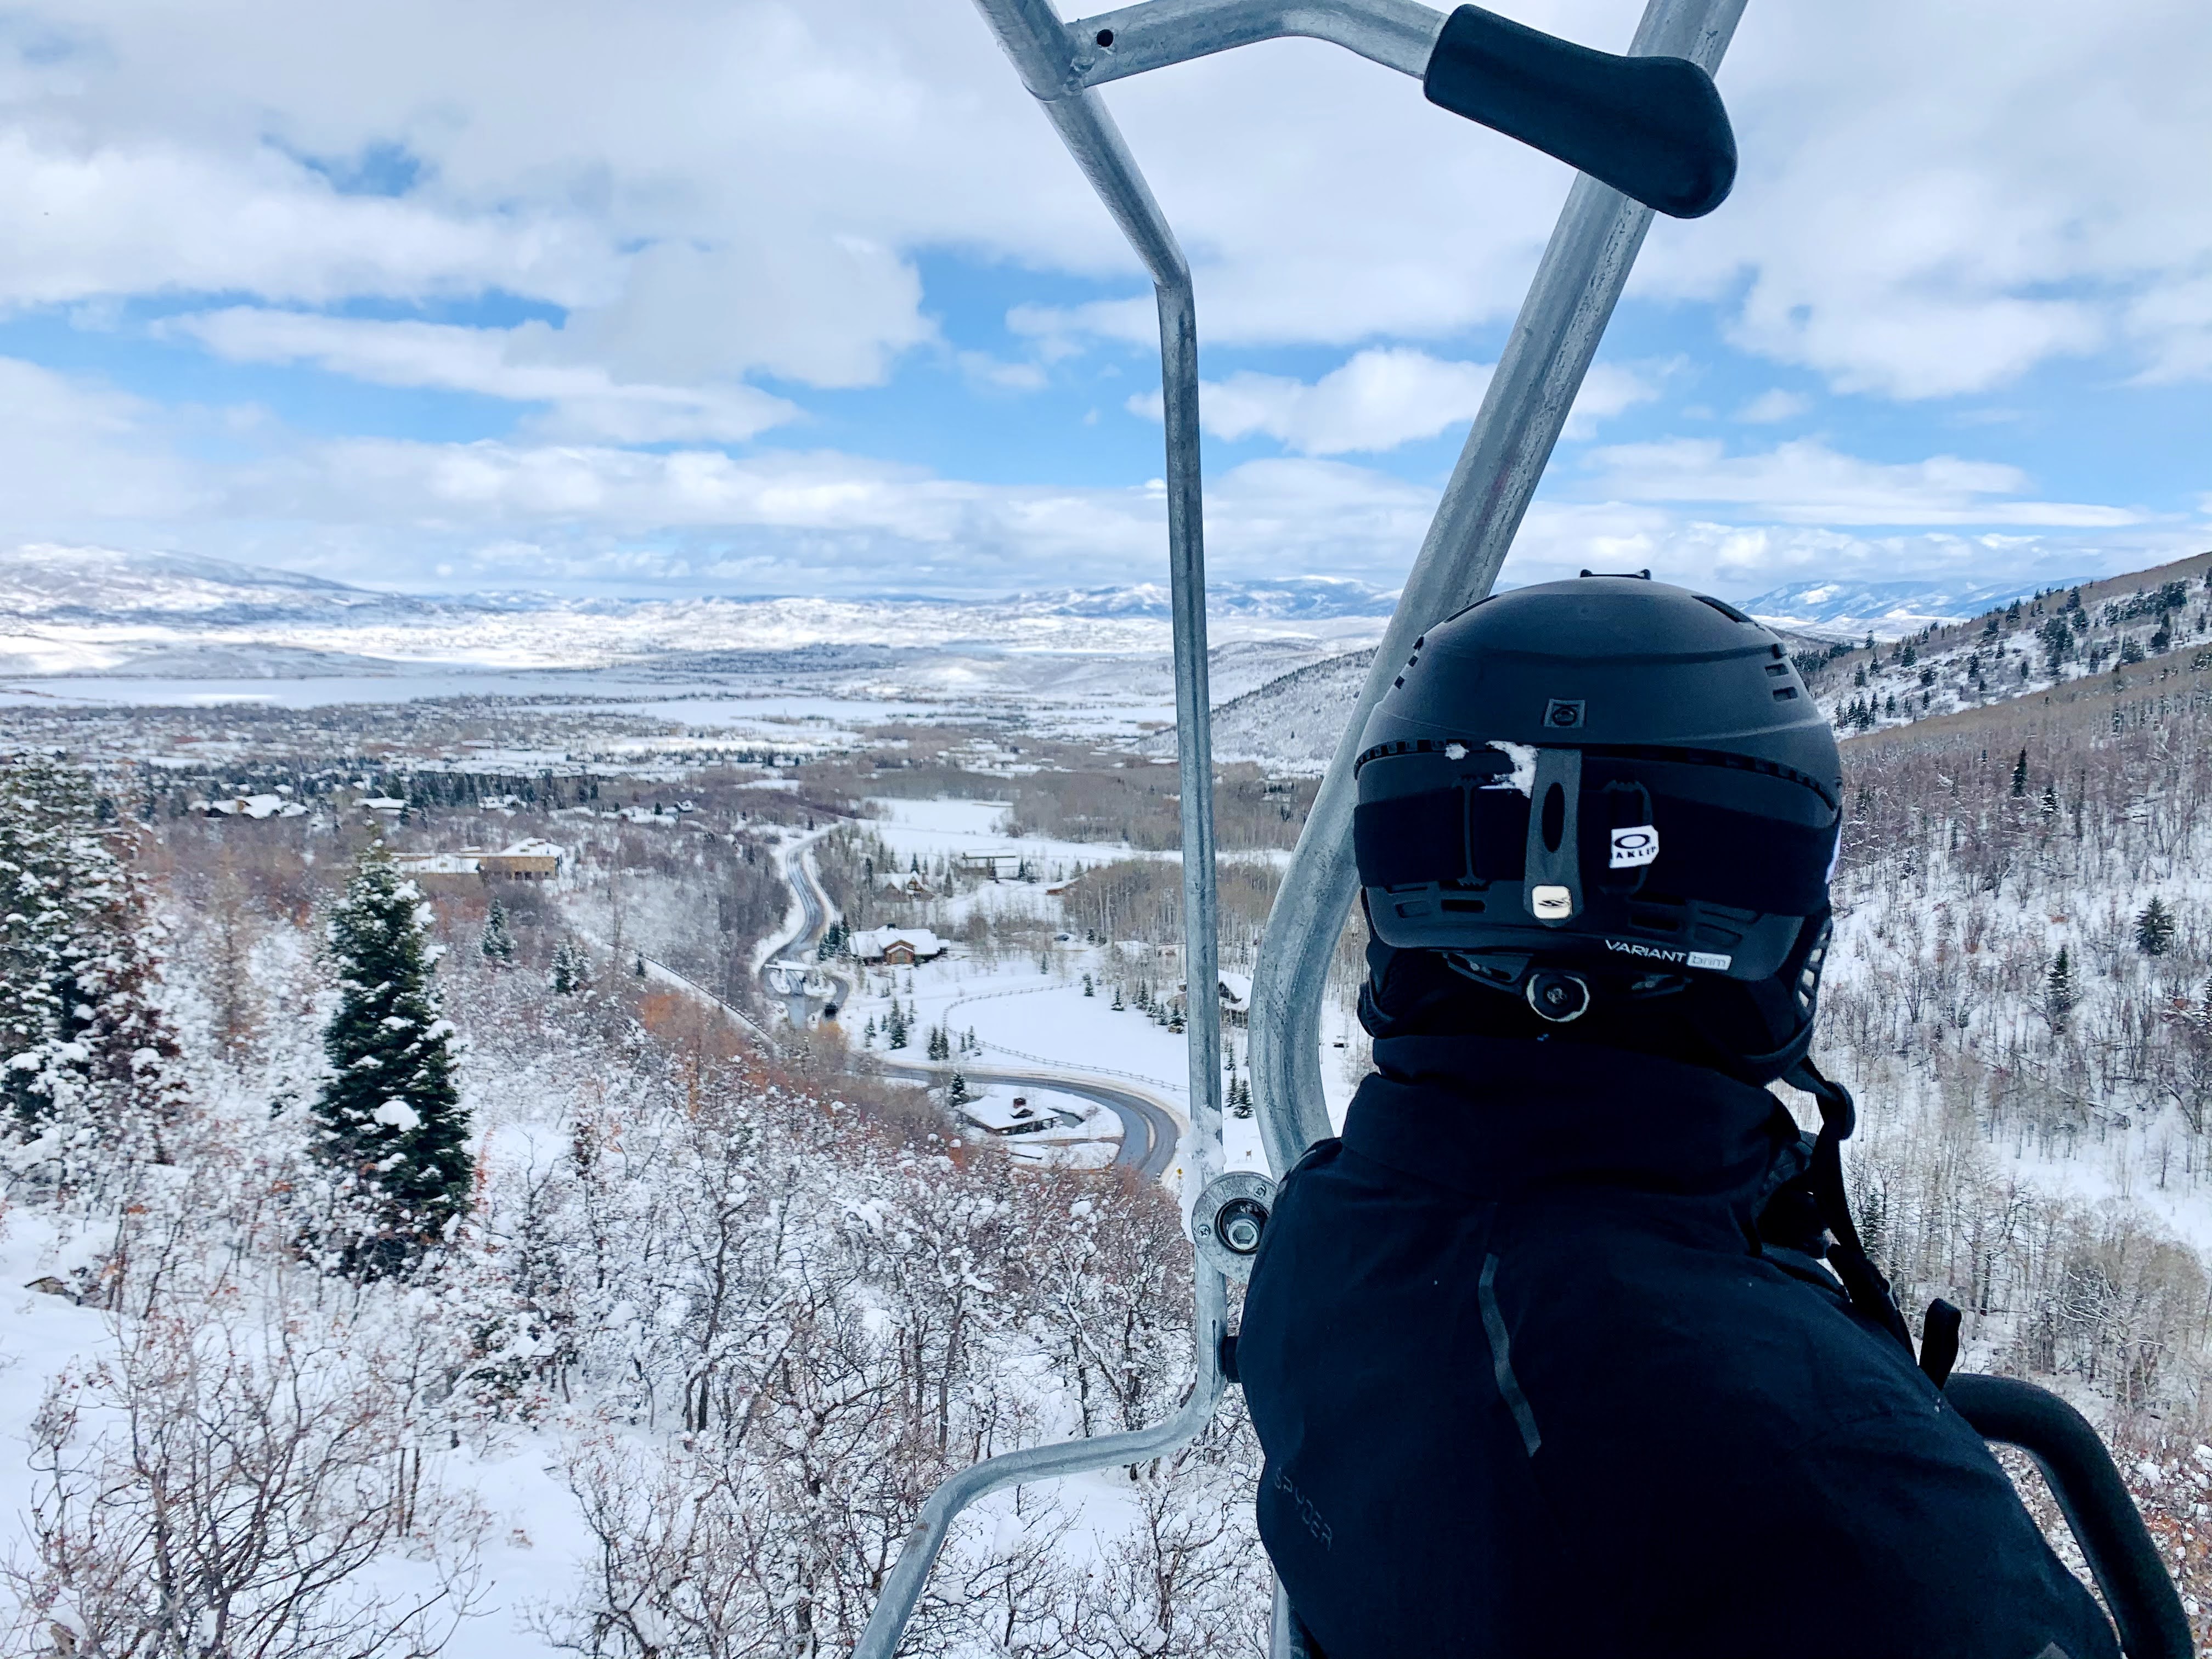 What You Need To Know Know About Skiing Utah During The COVID-19 Pandemic